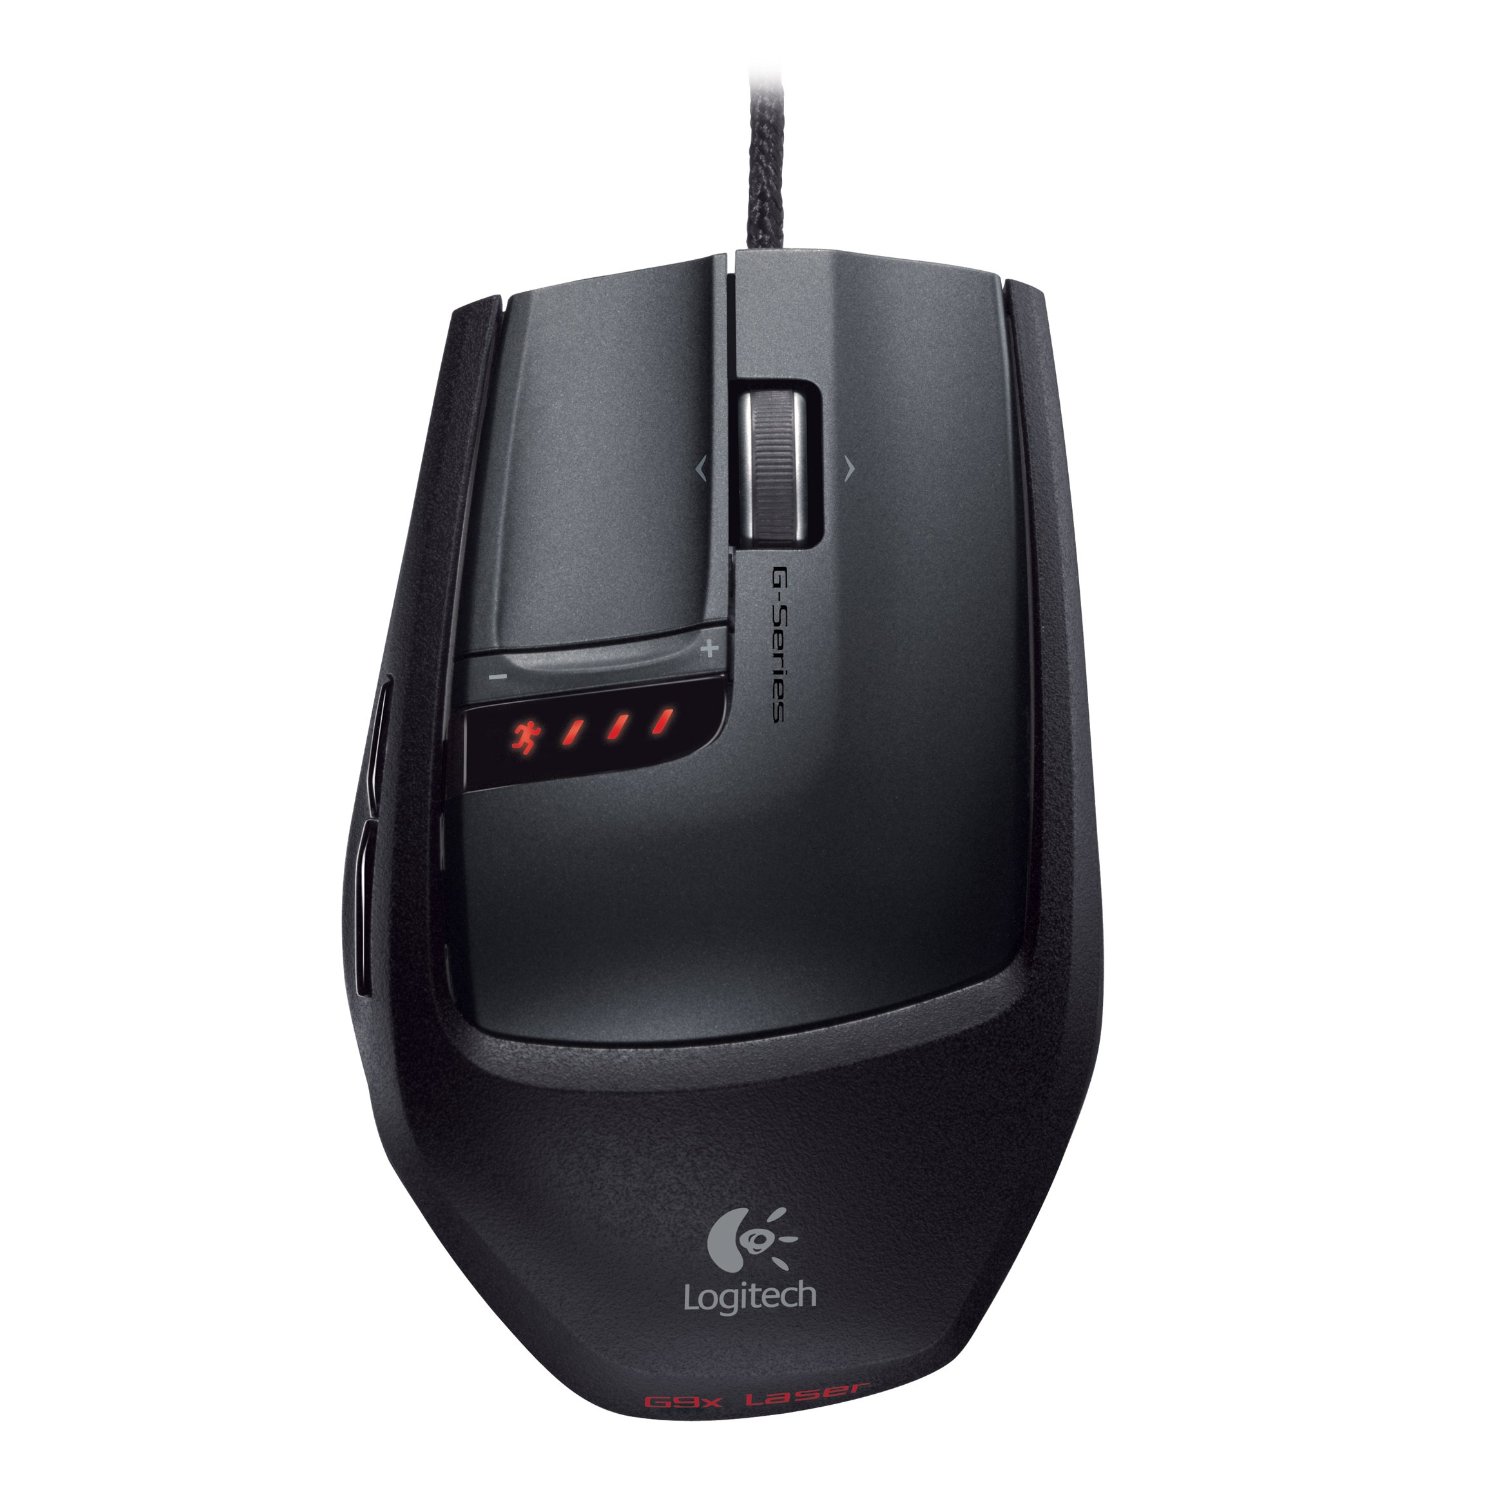 http://thetechjournal.com/wp-content/uploads/images/1111/1321182752-logitech-g9x-programmable-laser-gaming-mouse-9.jpg